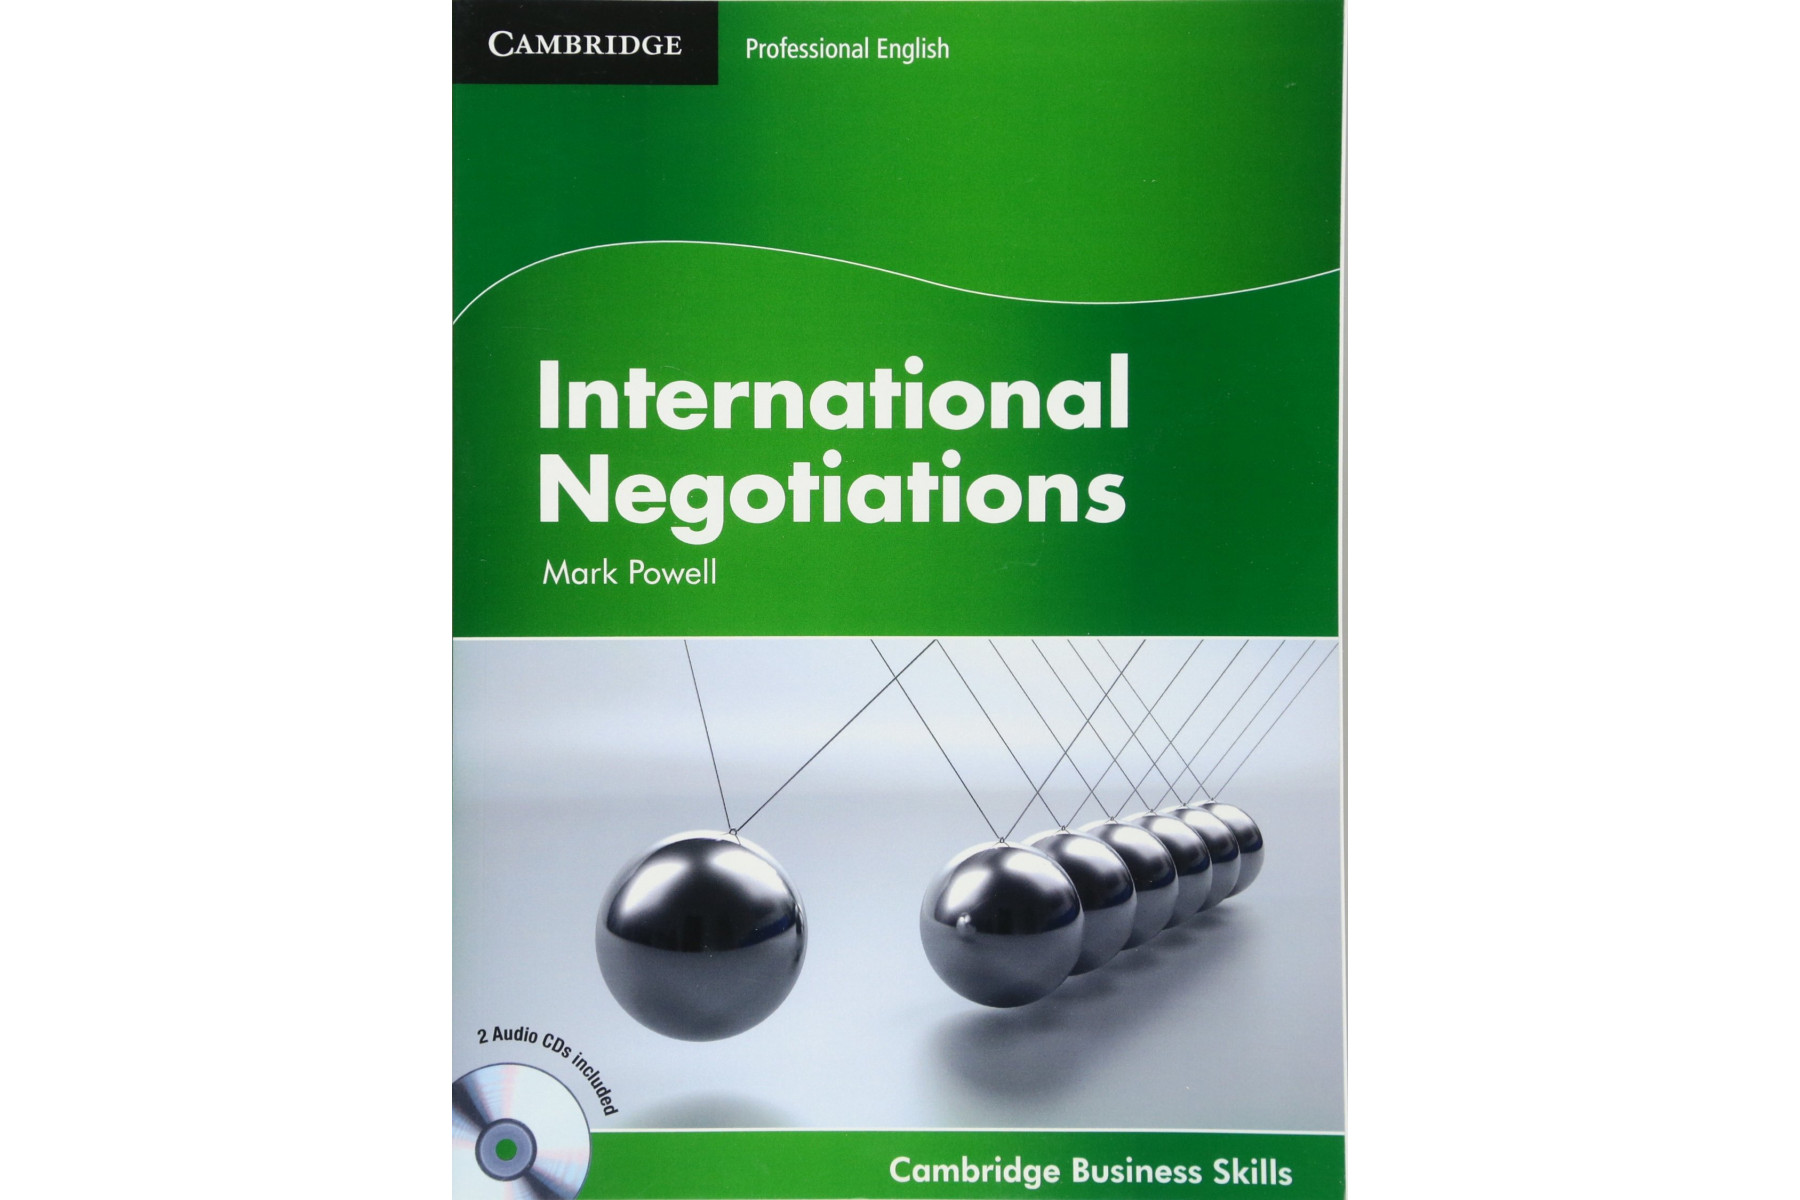 International Negotiations Student's Book with Audio CDs (2)